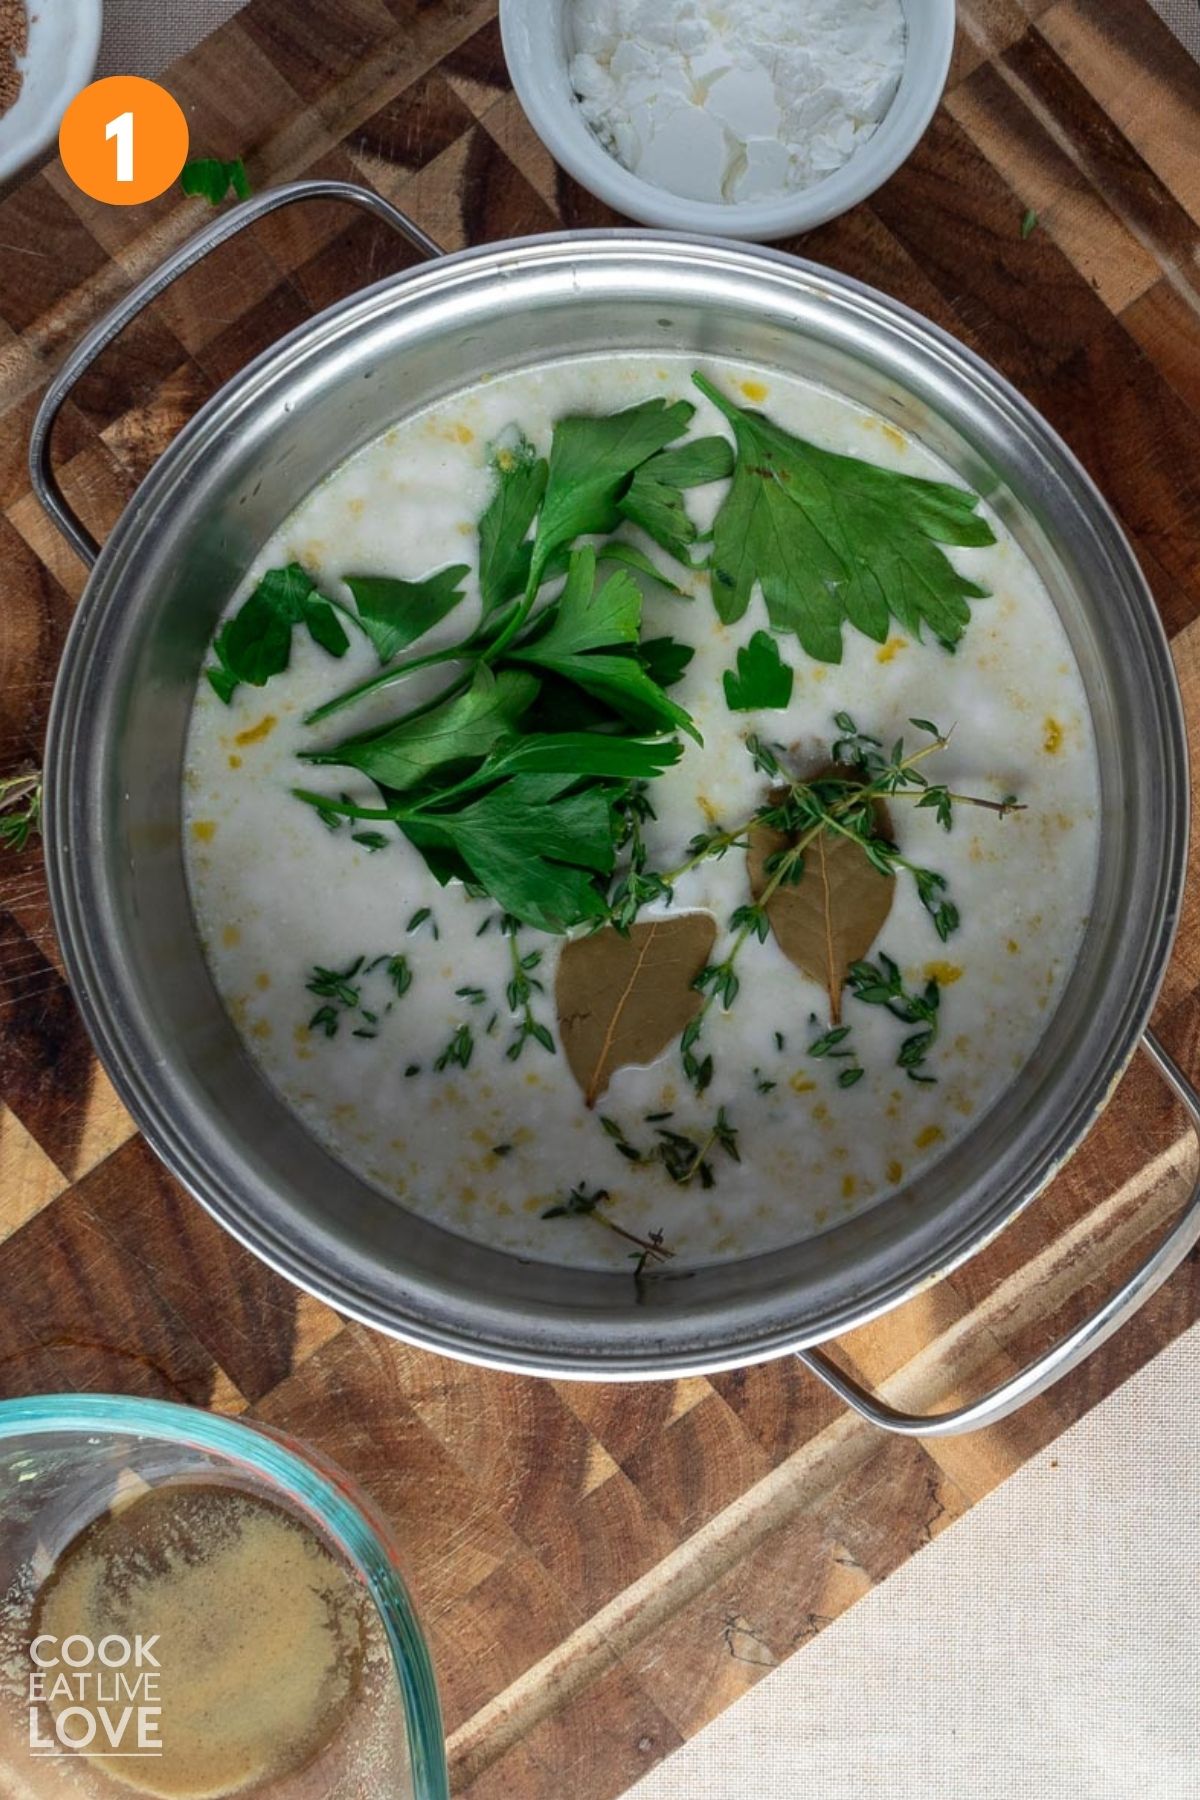 Coconut milk in a saucepan with parsley, thyme, and bay leaves added.